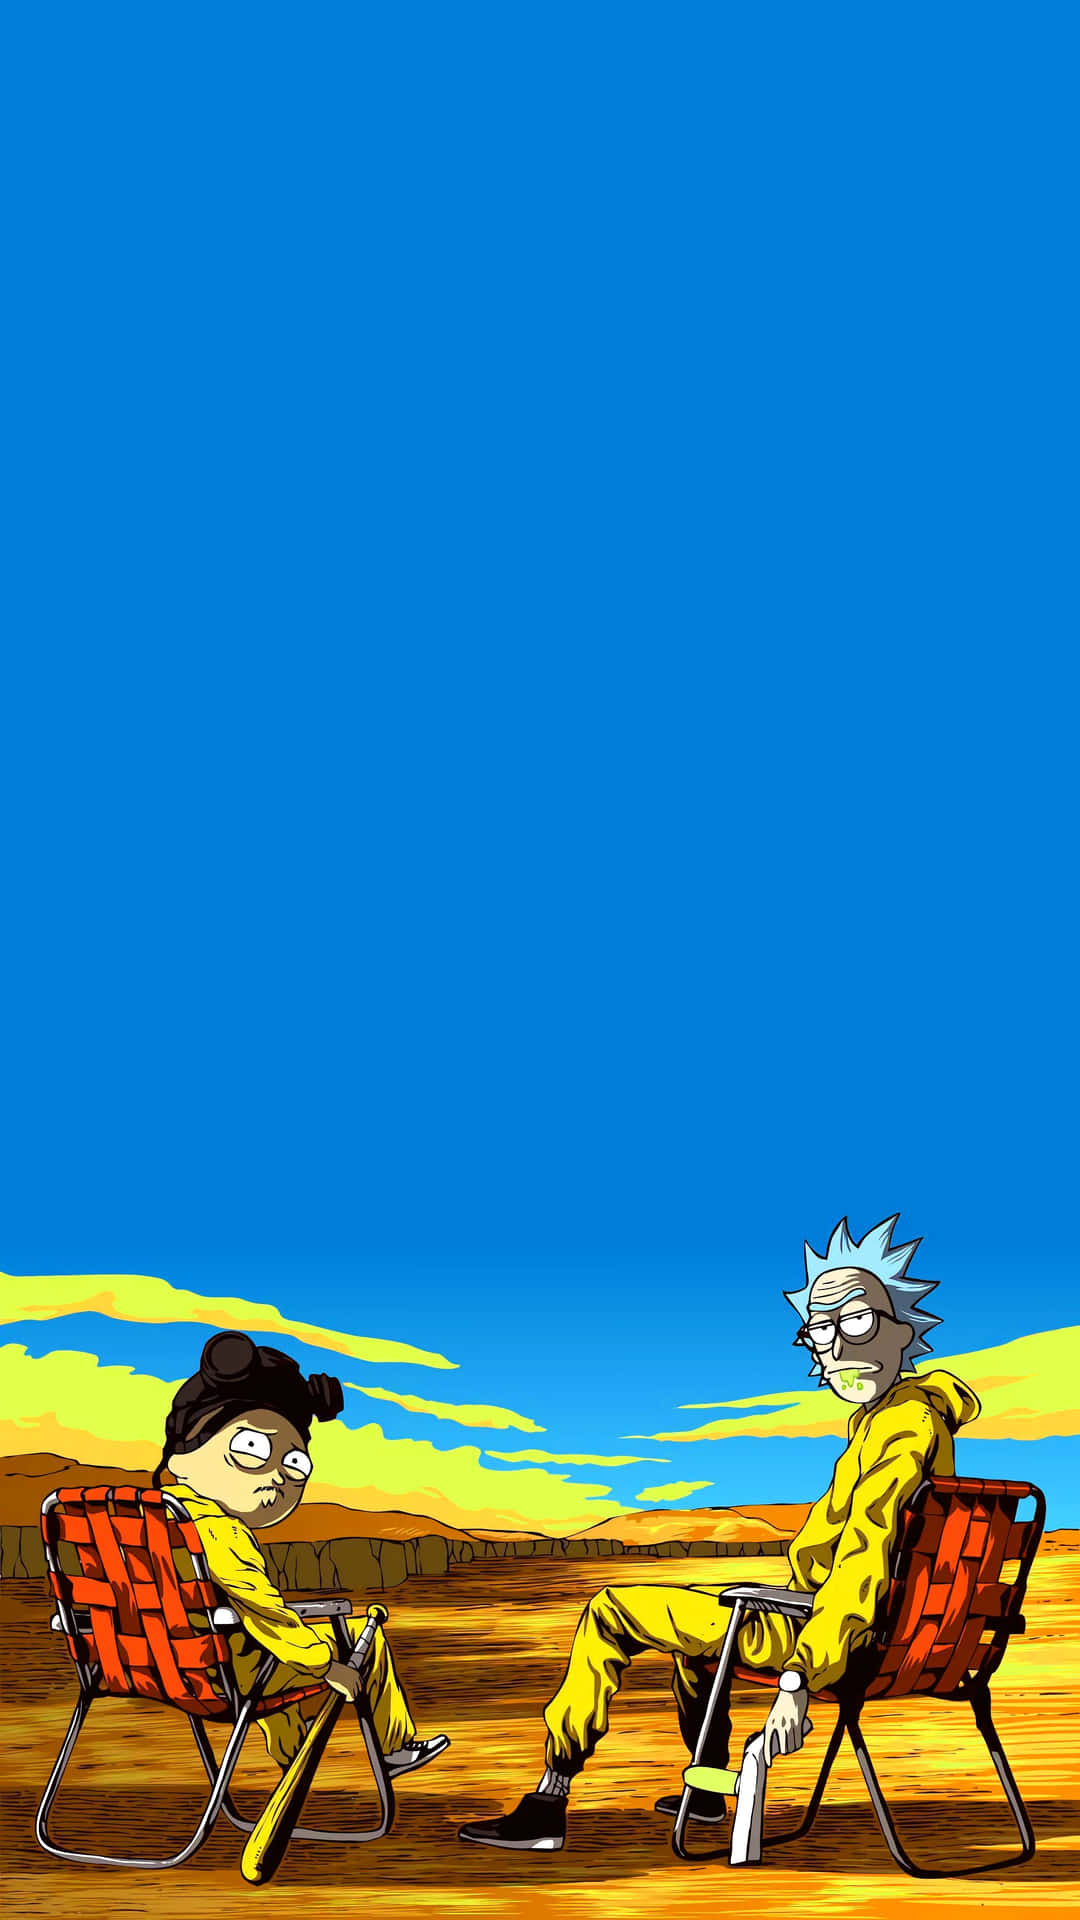 Wubba Lubba Dub Dub - The Exciting Adventures of Rick and Morty Wallpaper